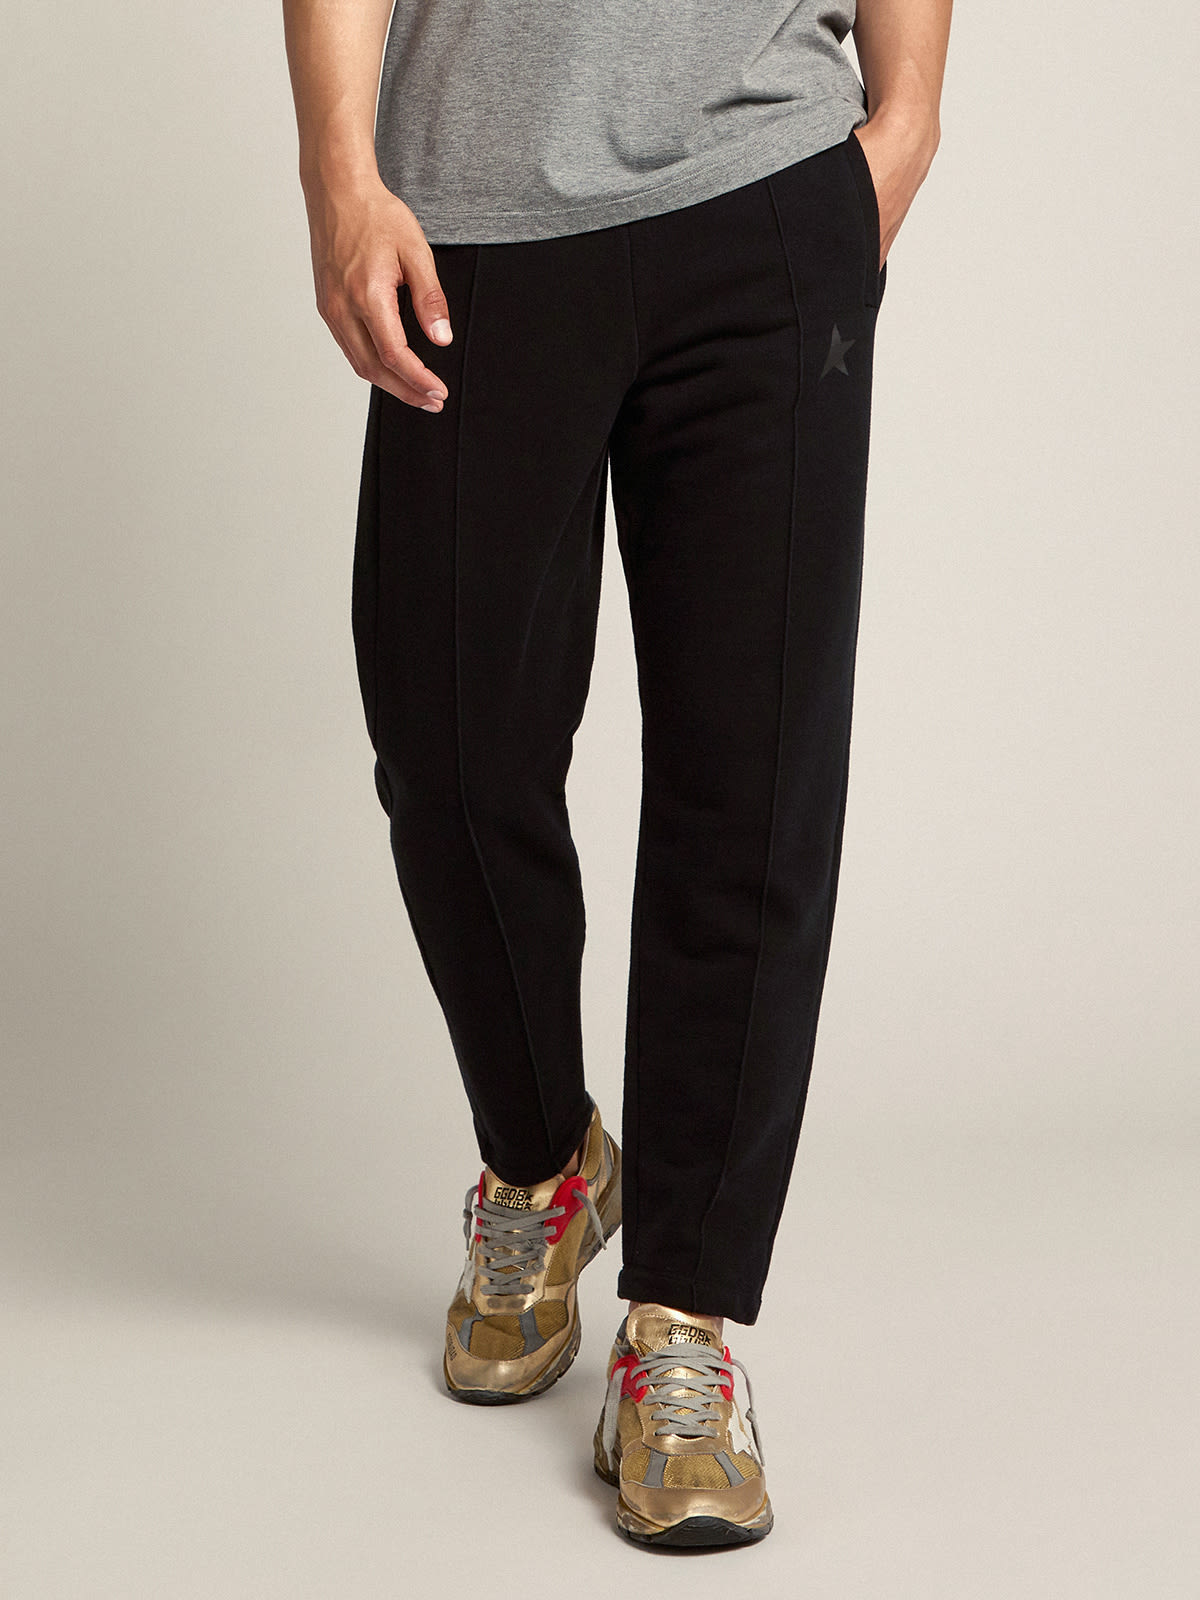 Golden Goose - Men’s black joggers with star on the front in 